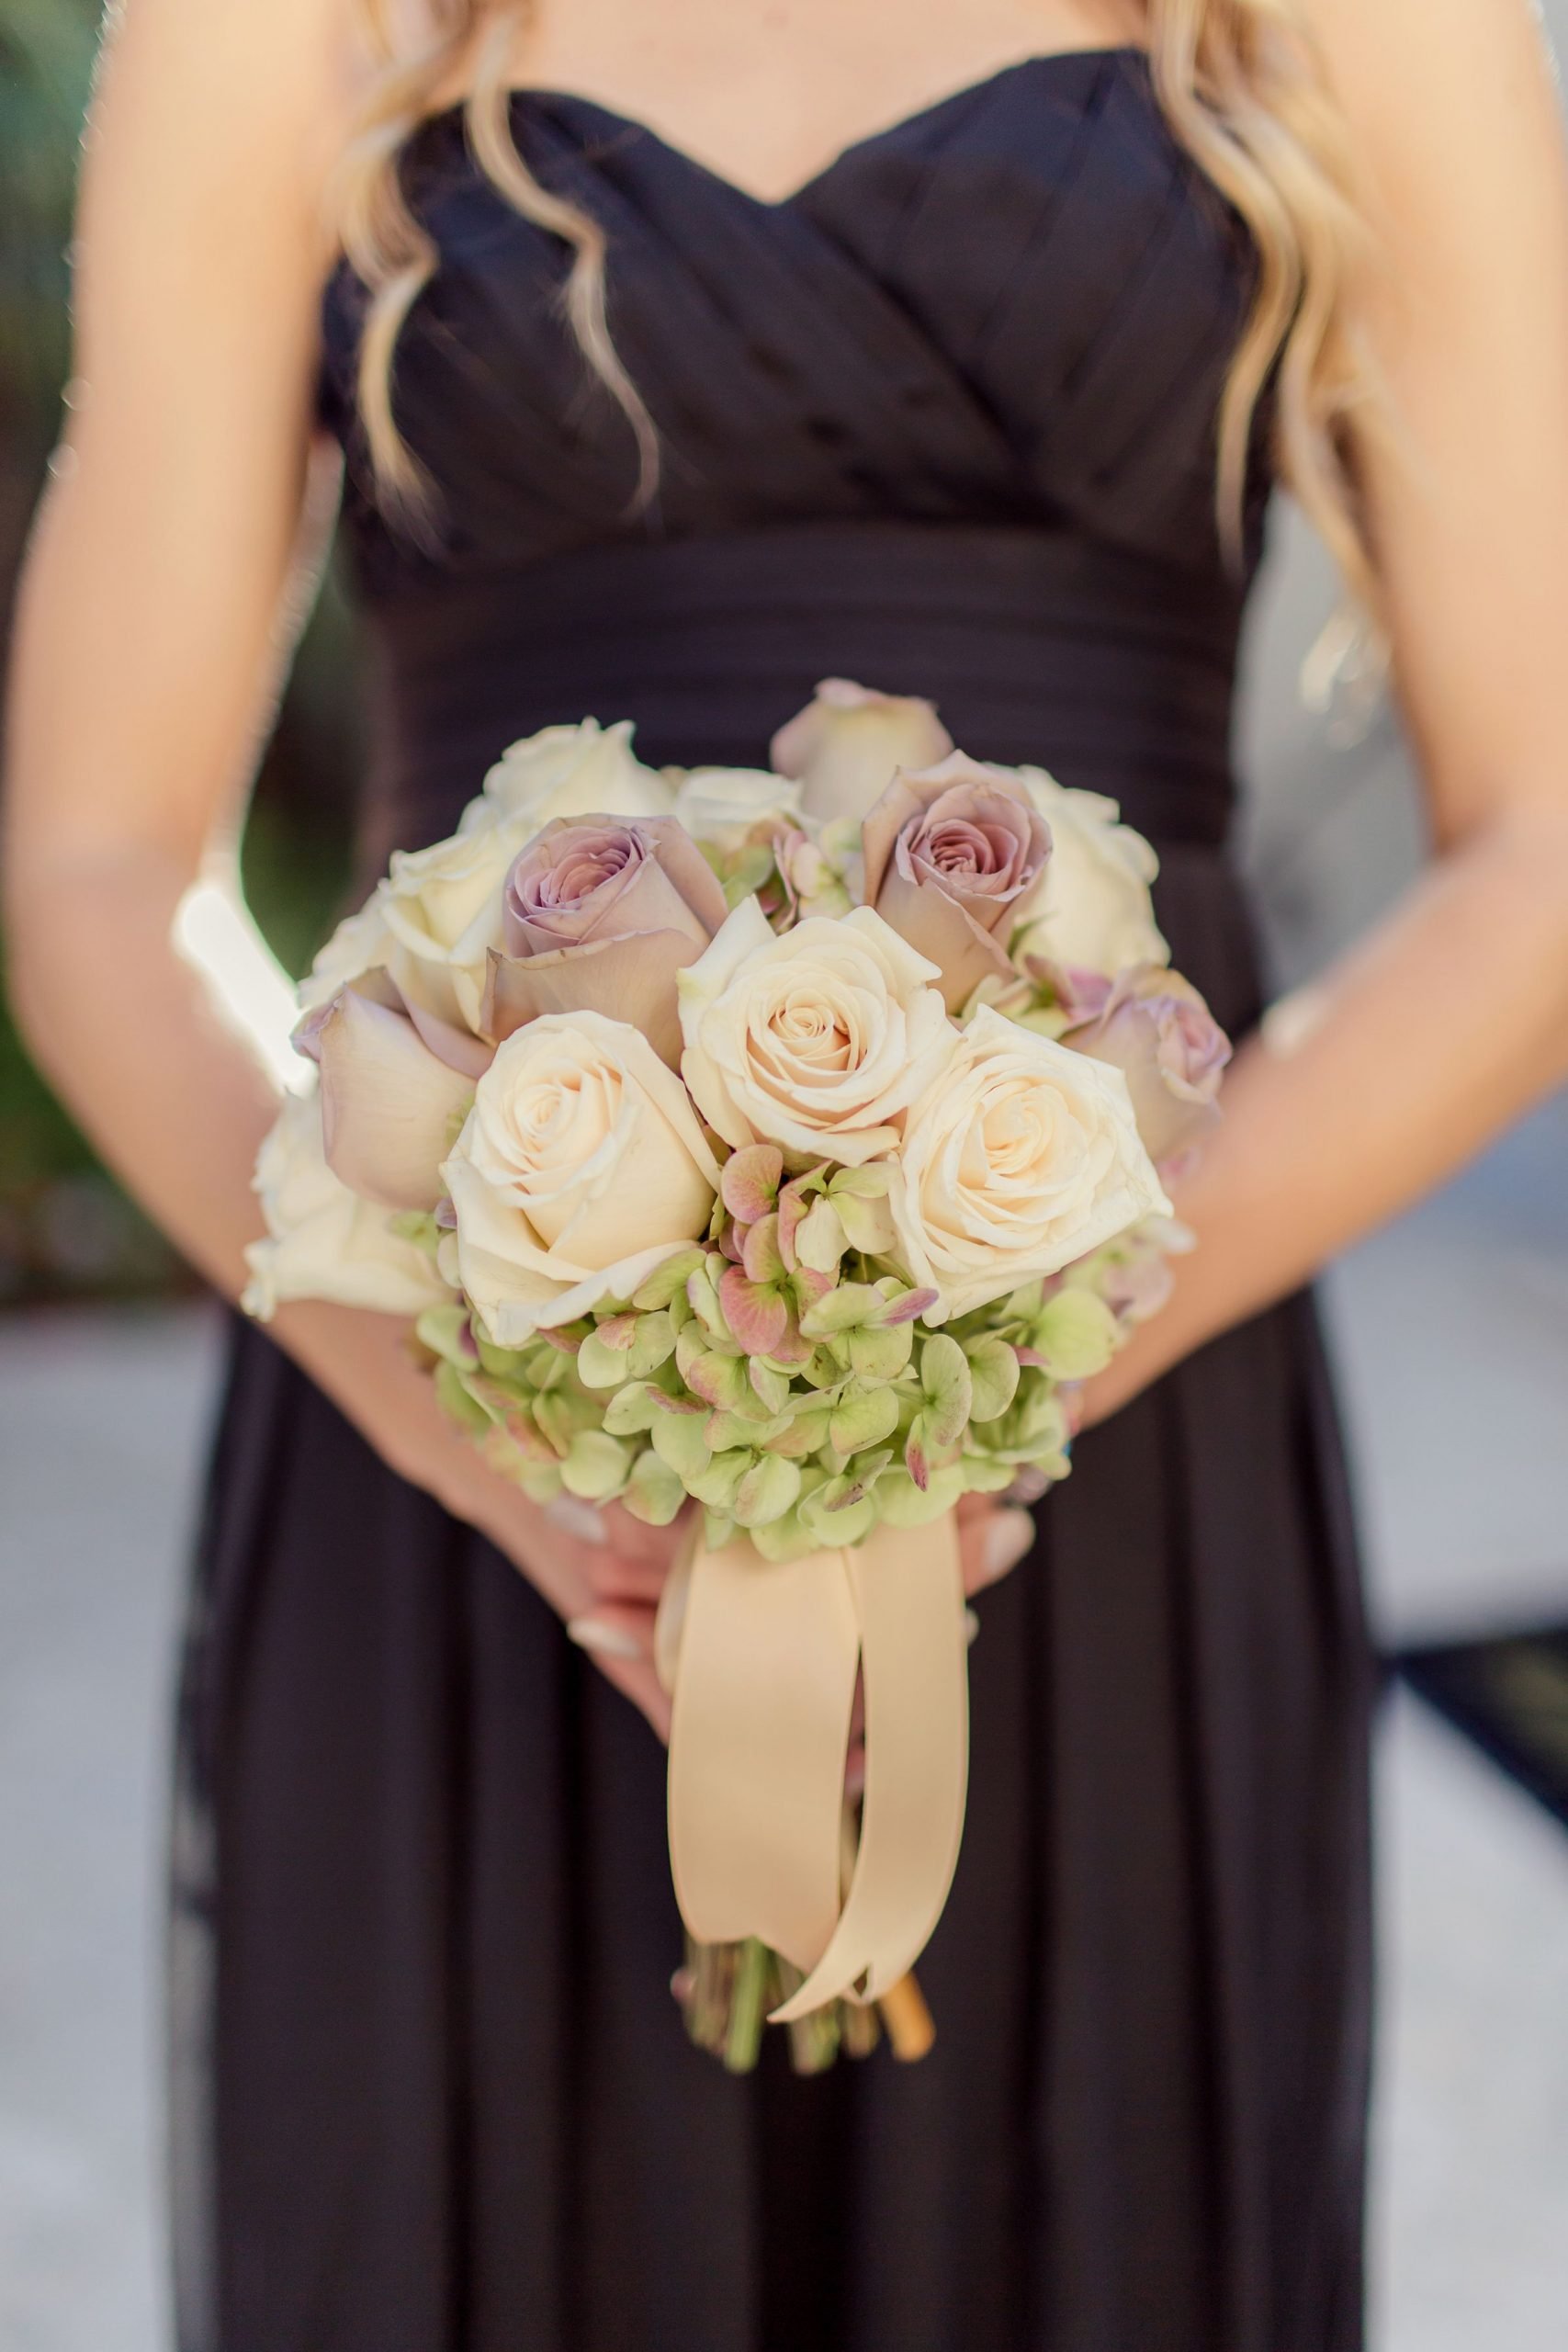 6 Ways To Save Money On Your Wedding Flowers